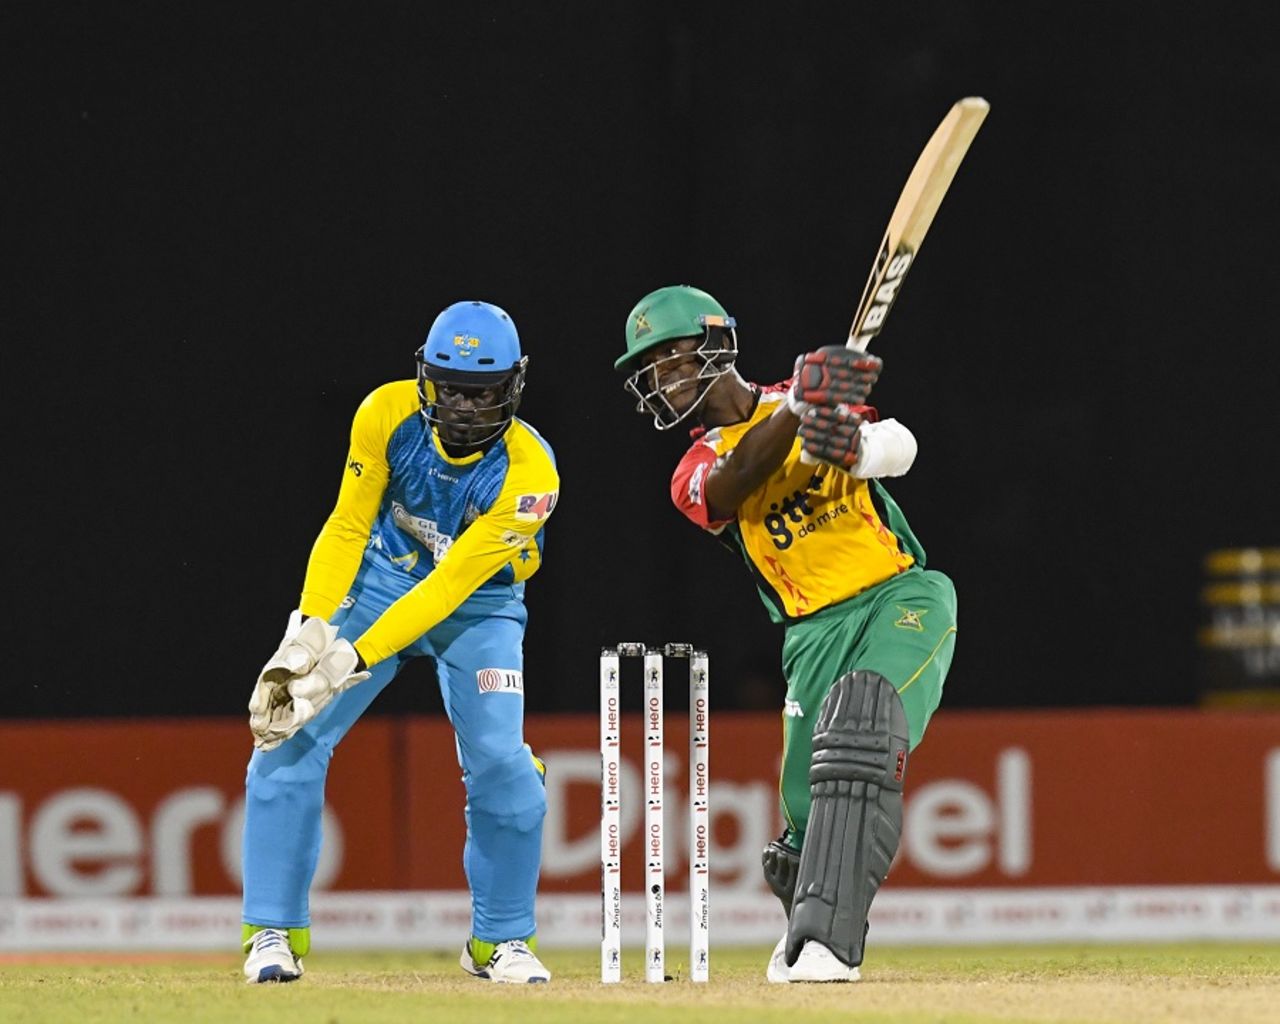 Jason Mohammed launches one over the off side, including the wicket of Darren Sammy, Guyana Amazon Warriors v St Lucia Stars, CPL 2017, Providence, August 22, 2017